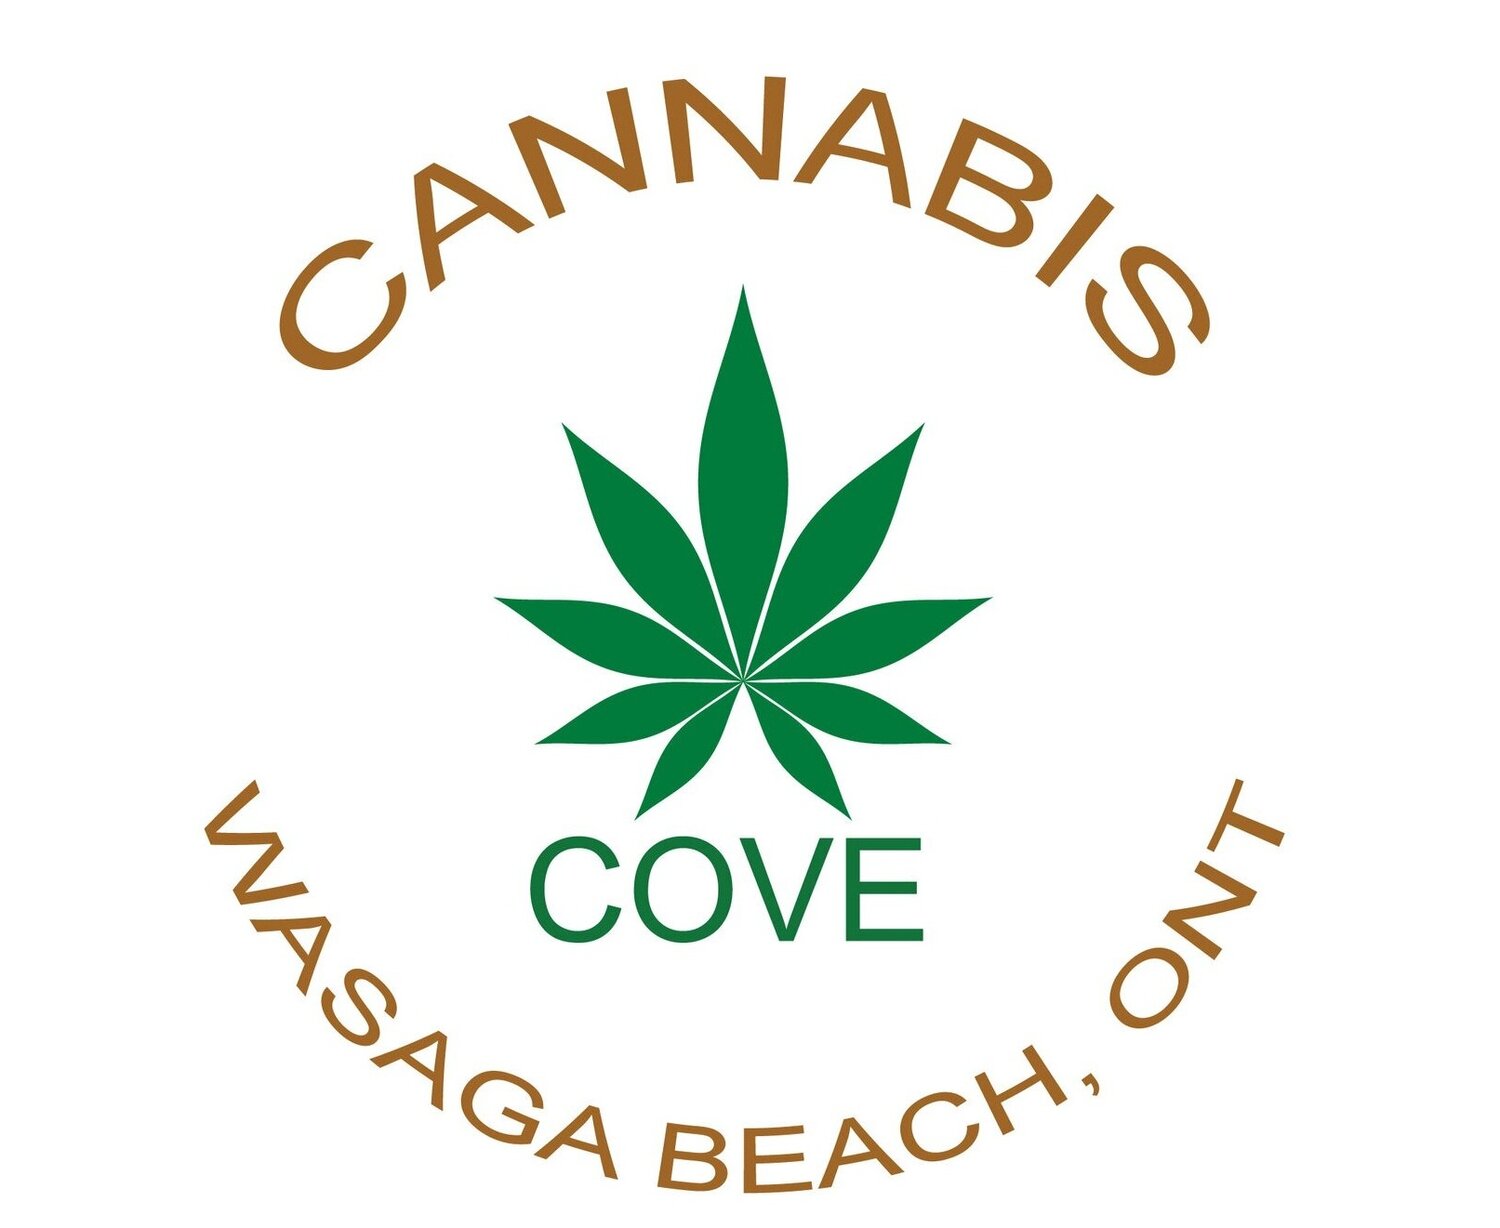 Welcome to Cannabis Cove